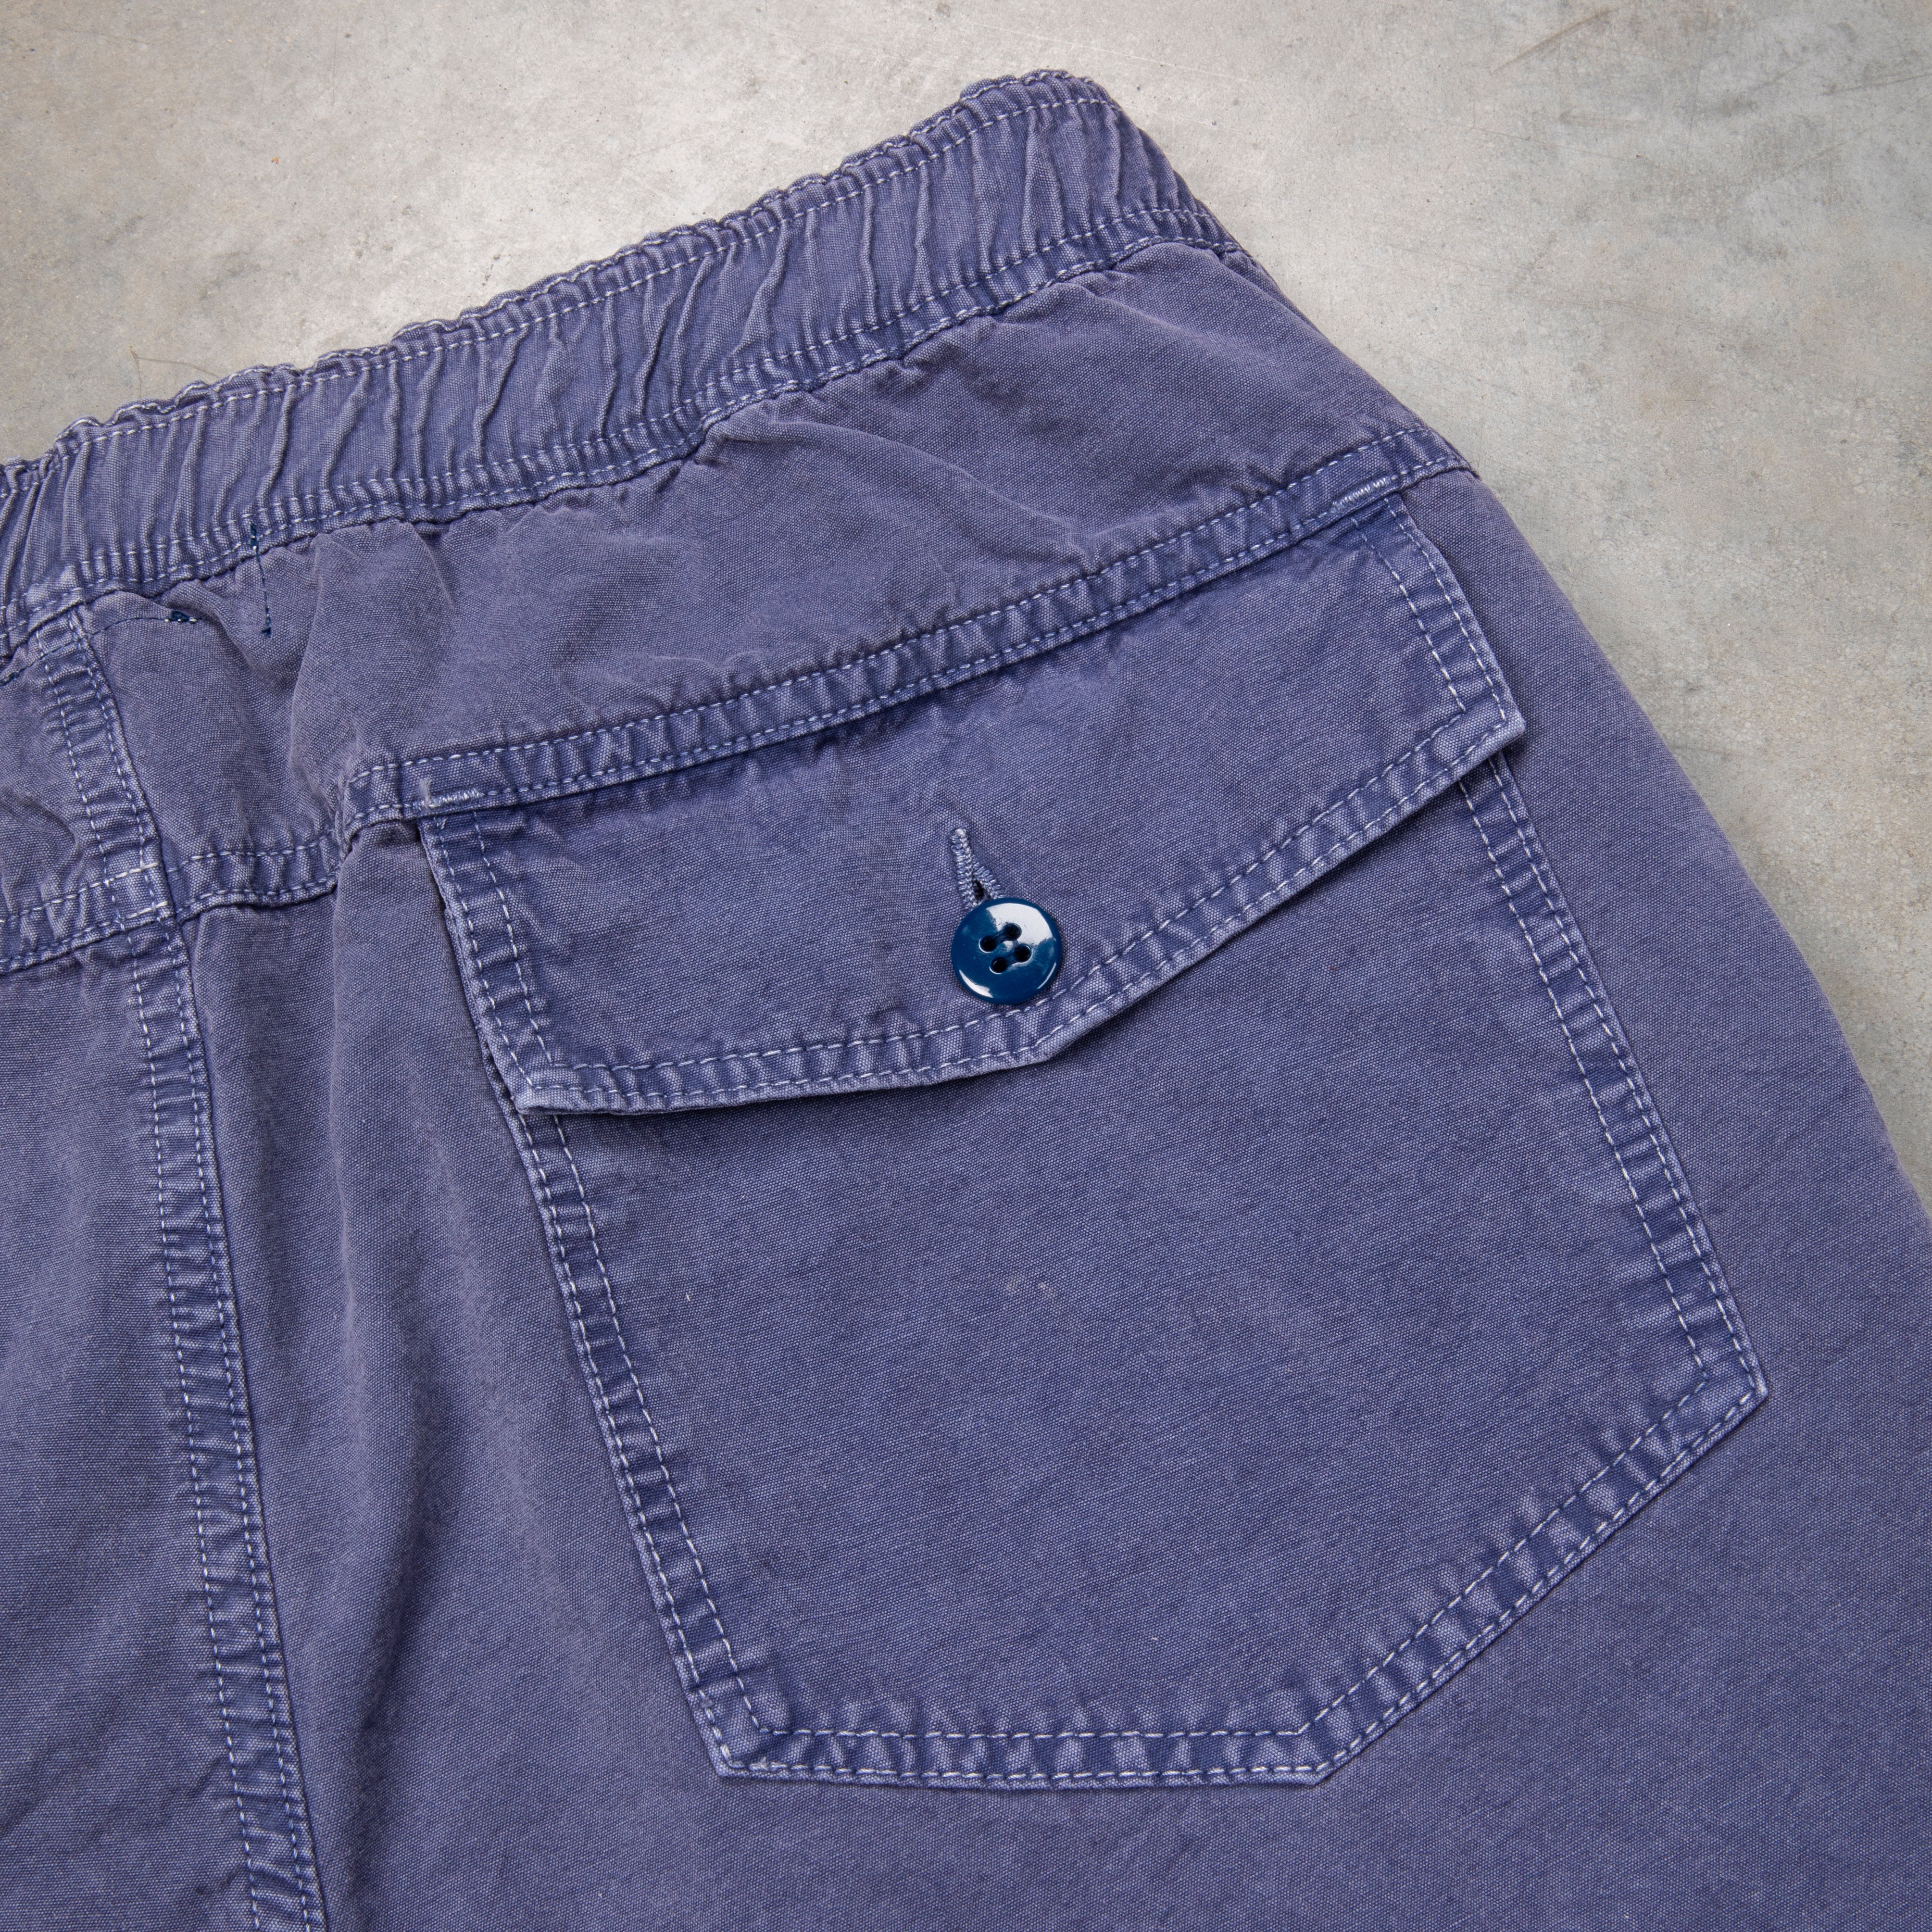 Remi Relief Tusser Shorts Navy